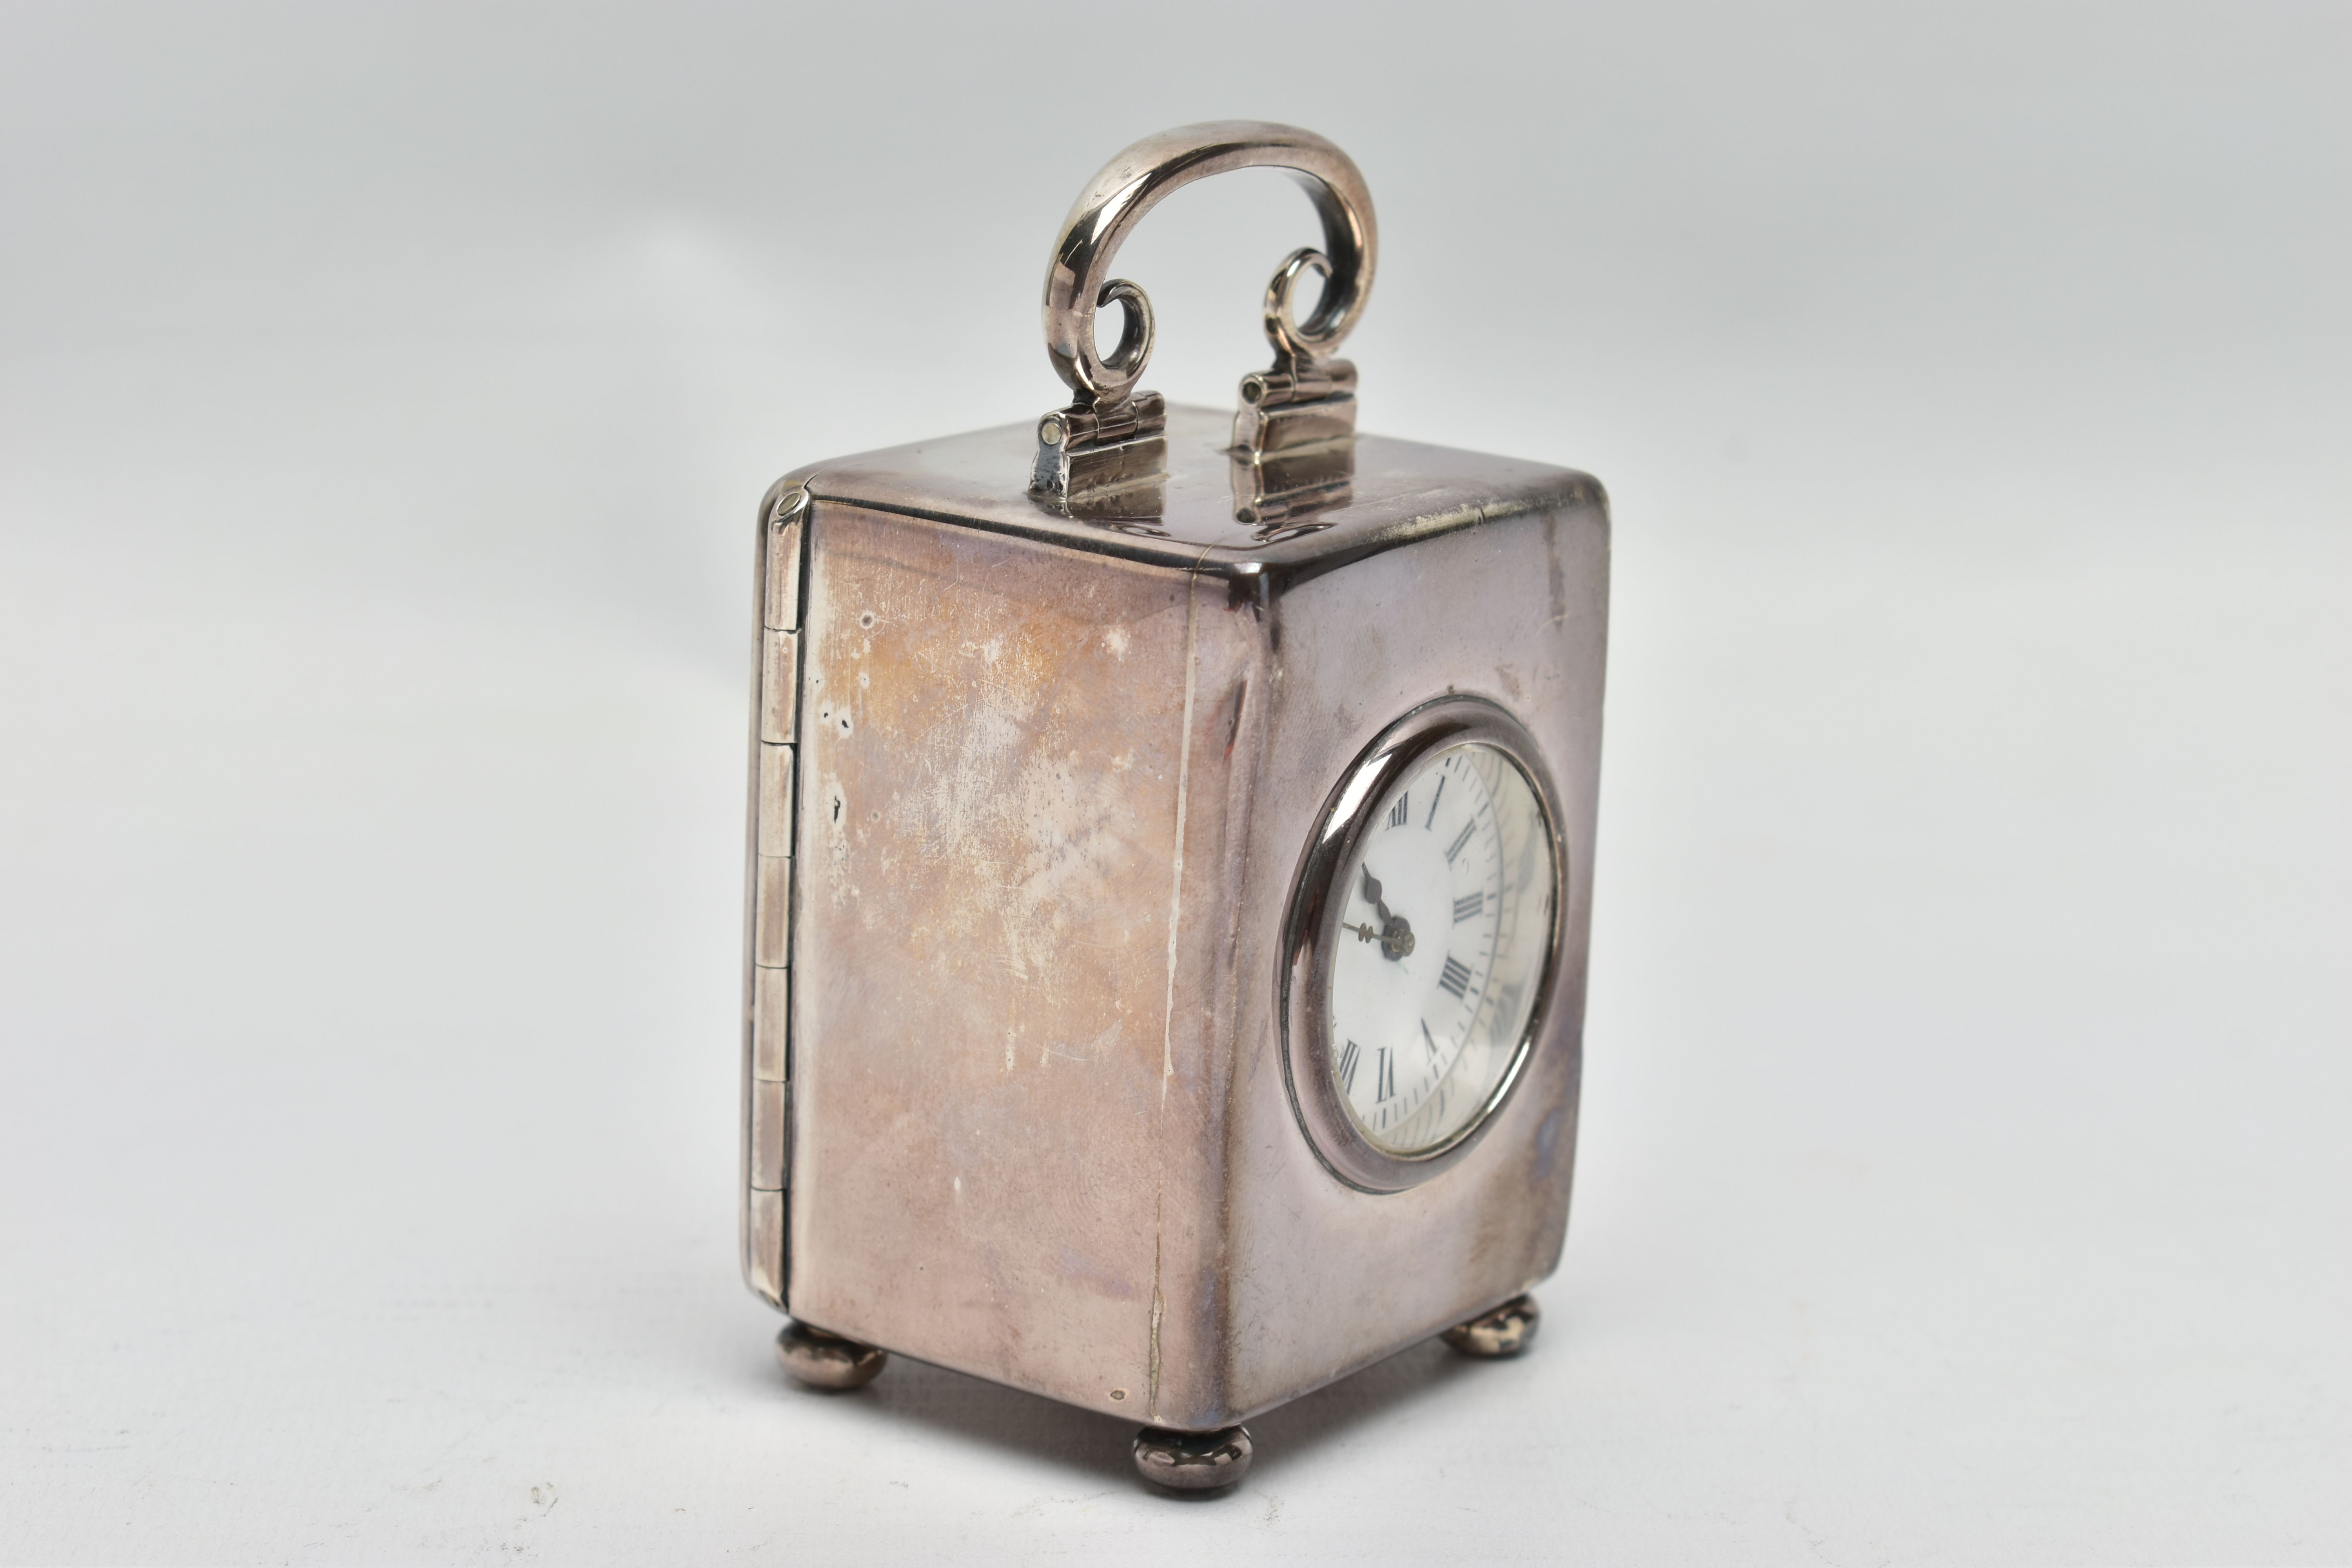 AN EDWARDIAN WILLIAM COMYNS MINIATURE SILVER BOUDOIR CLOCK, the plain case with swing carrying - Image 4 of 7